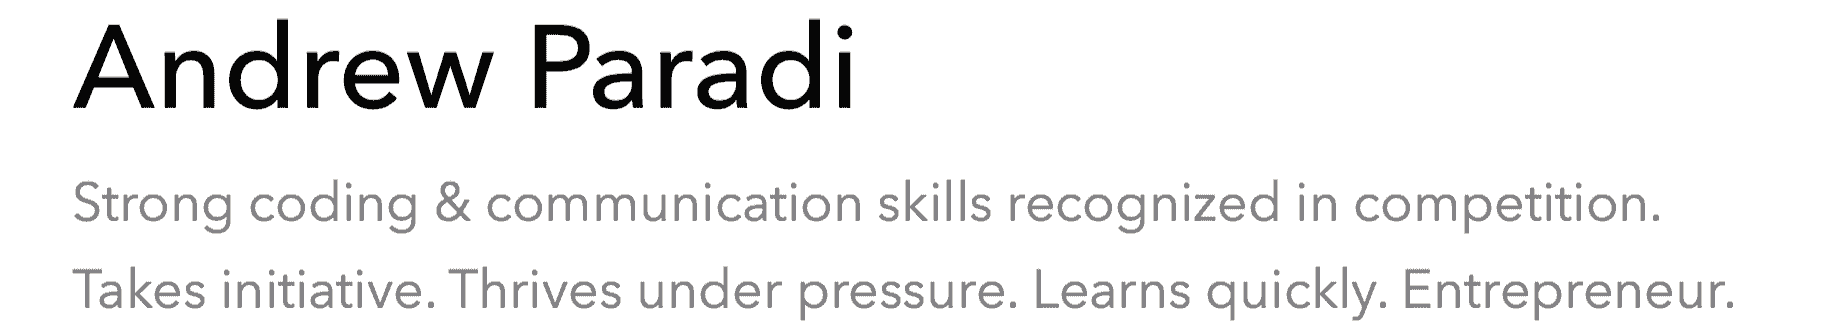 Mantra section from my resume that focuses on core soft skills and competencies, organized by priority for the specific job posting.